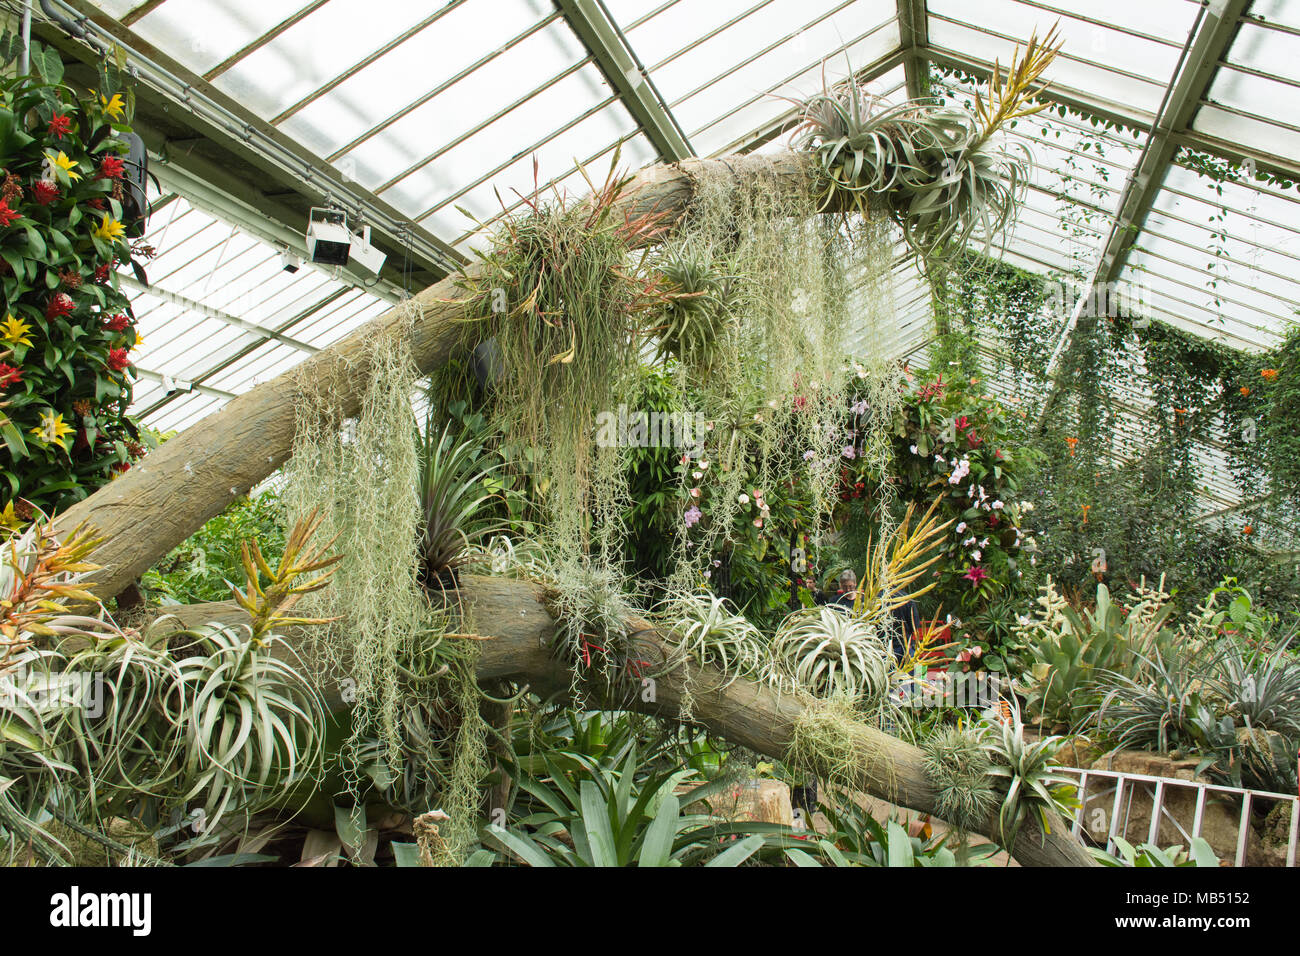 Display of tropical bromeliads and orchids in the Princess of Wales Conservatory, Royal Botanic Gardens at Kew, London, UK Stock Photo